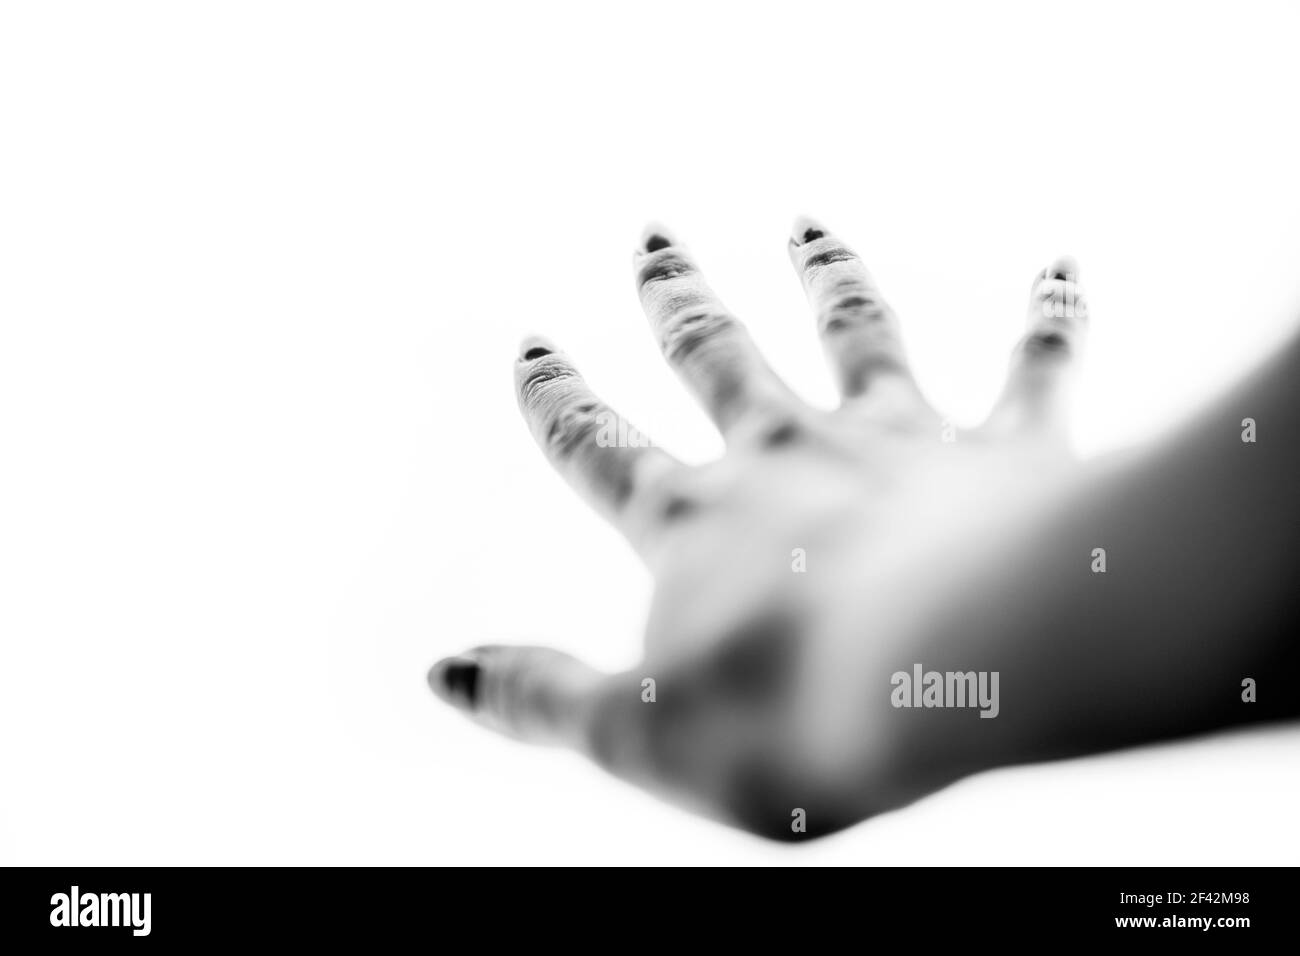 Female hand on a white background with spread fingers. Bye gesture. BW photo, blurred soft focus. Stock Photo